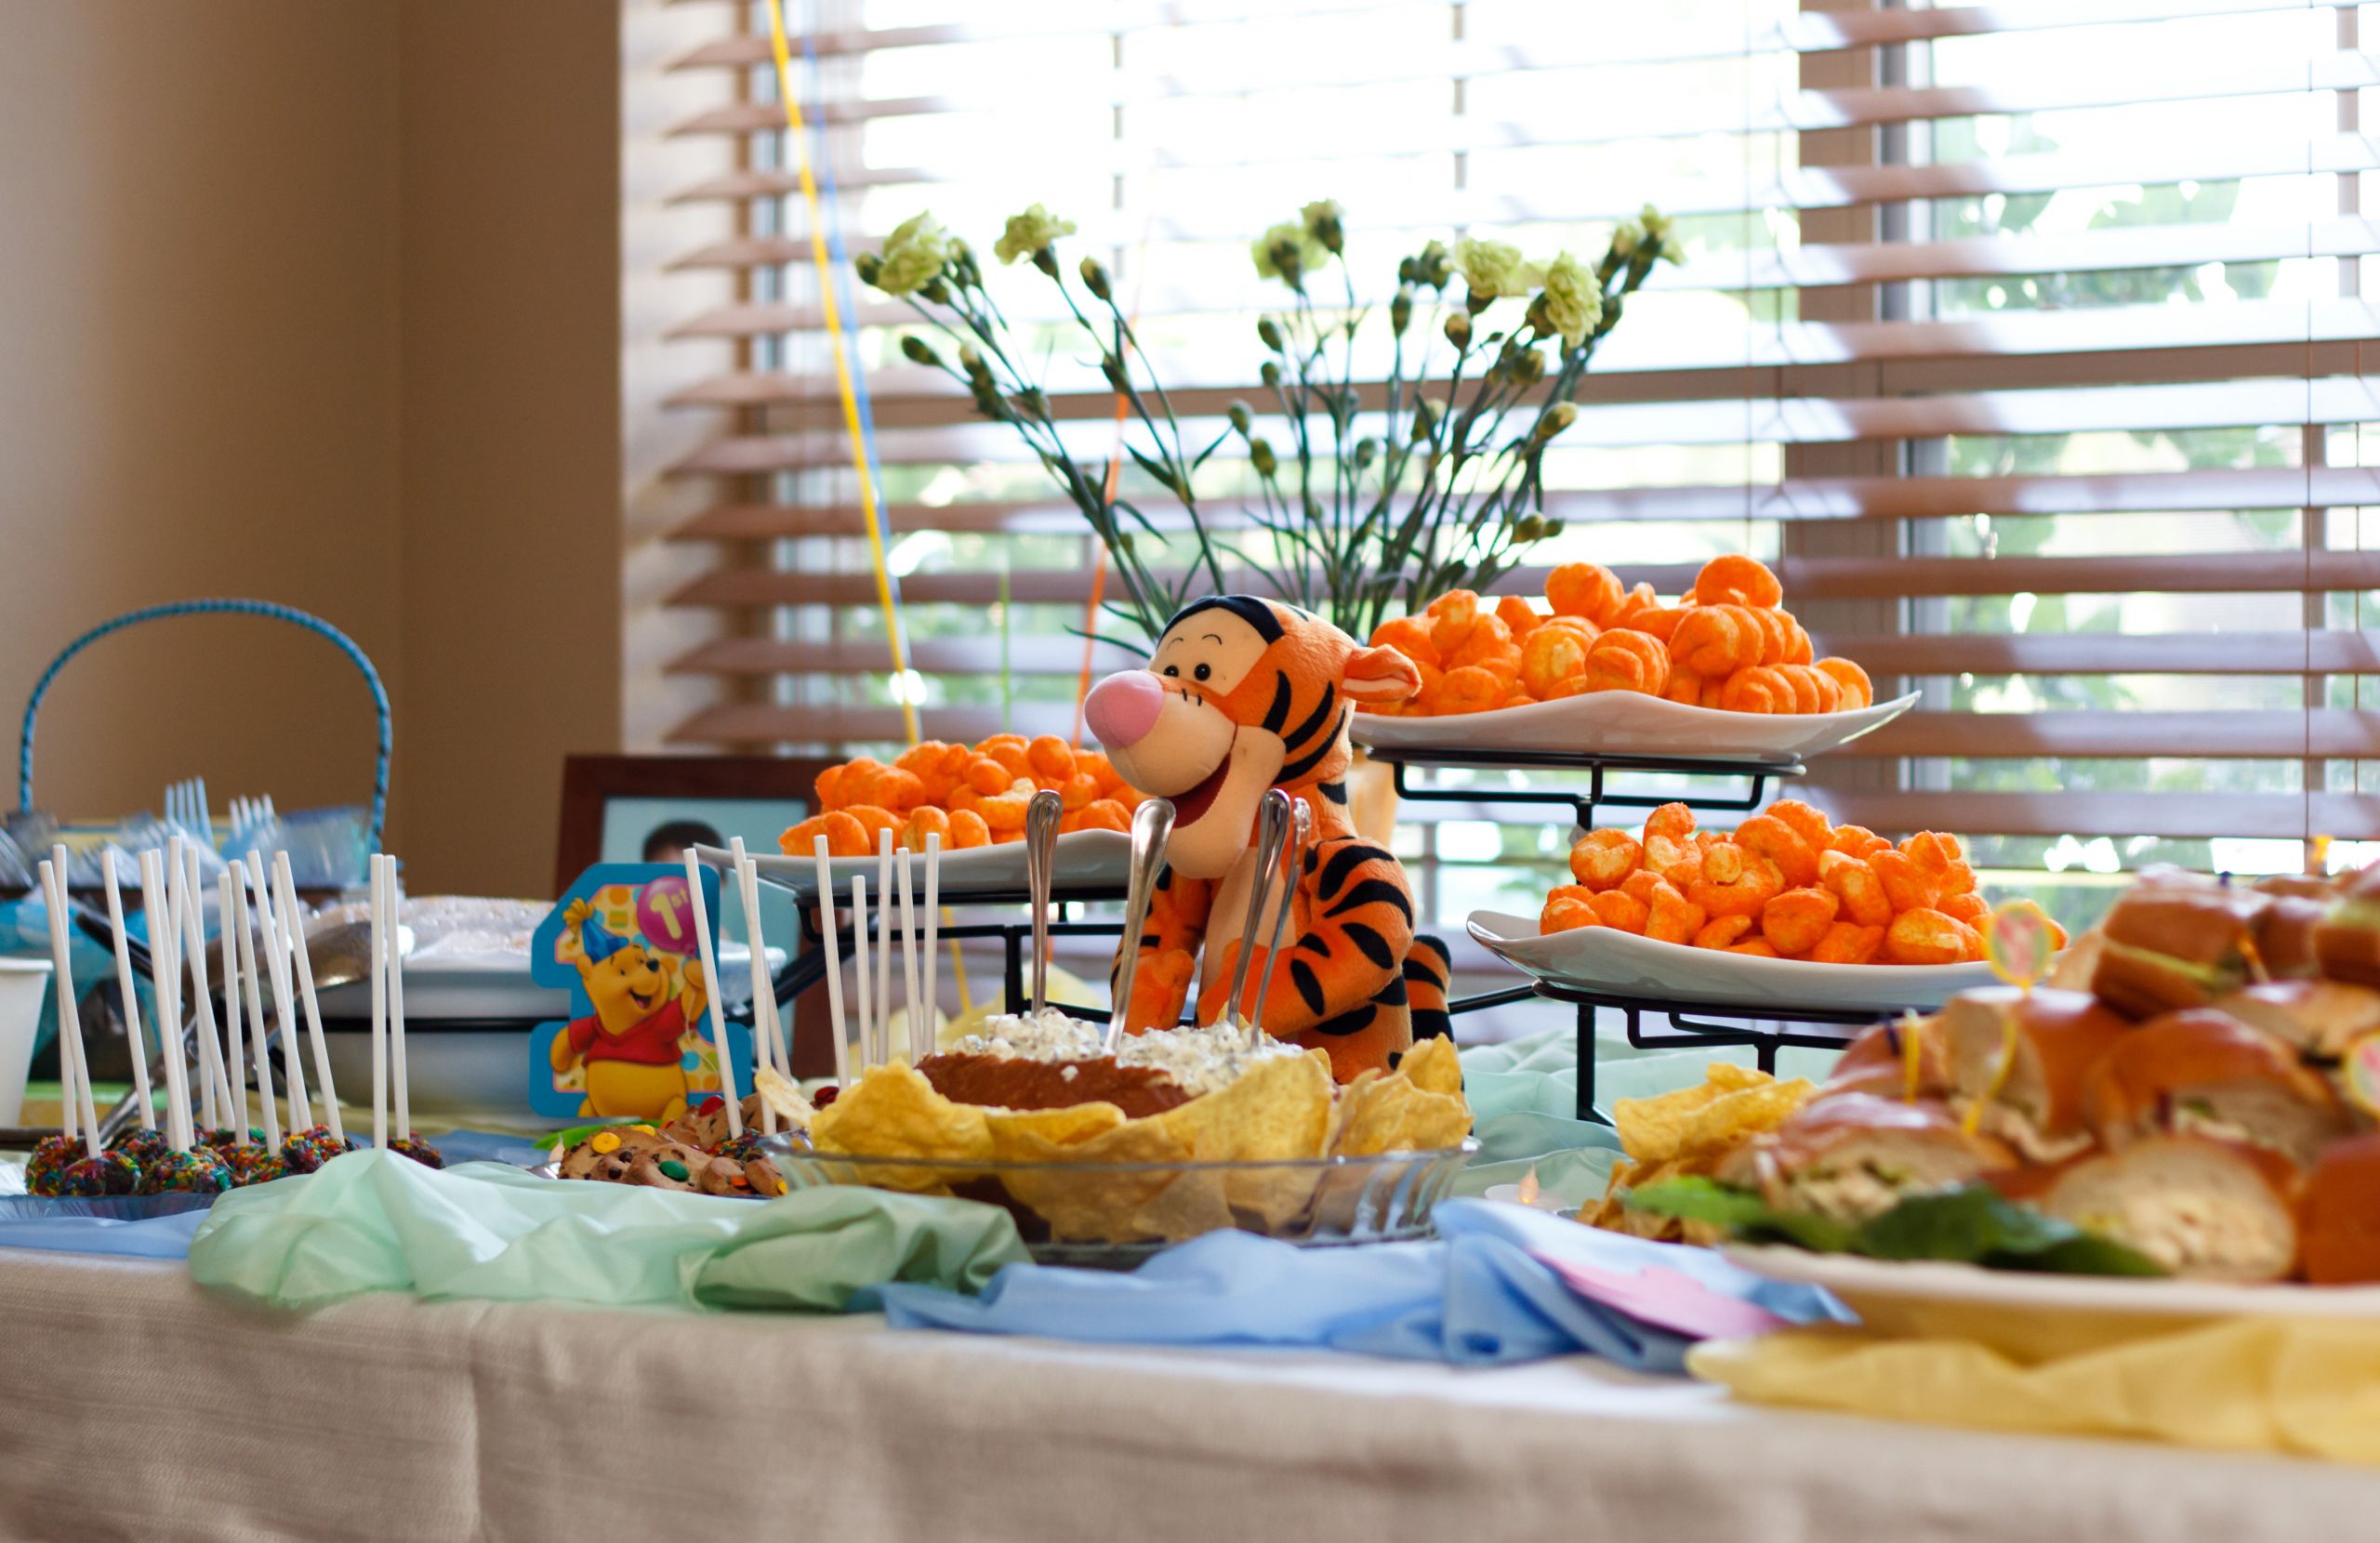 Winnie The Pooh 1st Birthday Decorations
 Winnie the Pooh My son’s first birthday party